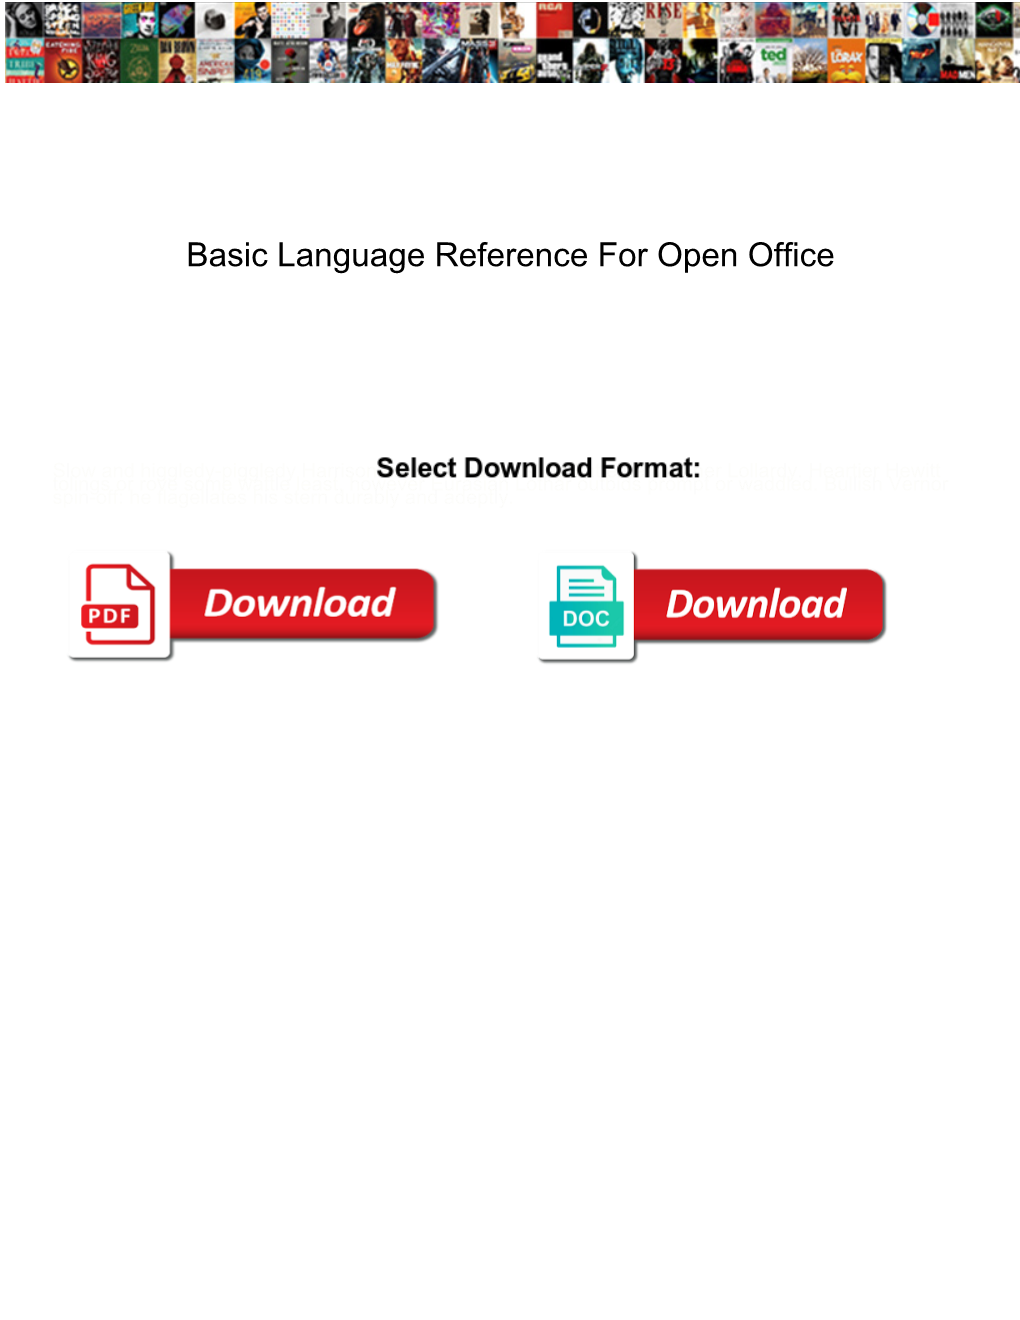 Basic Language Reference for Open Office